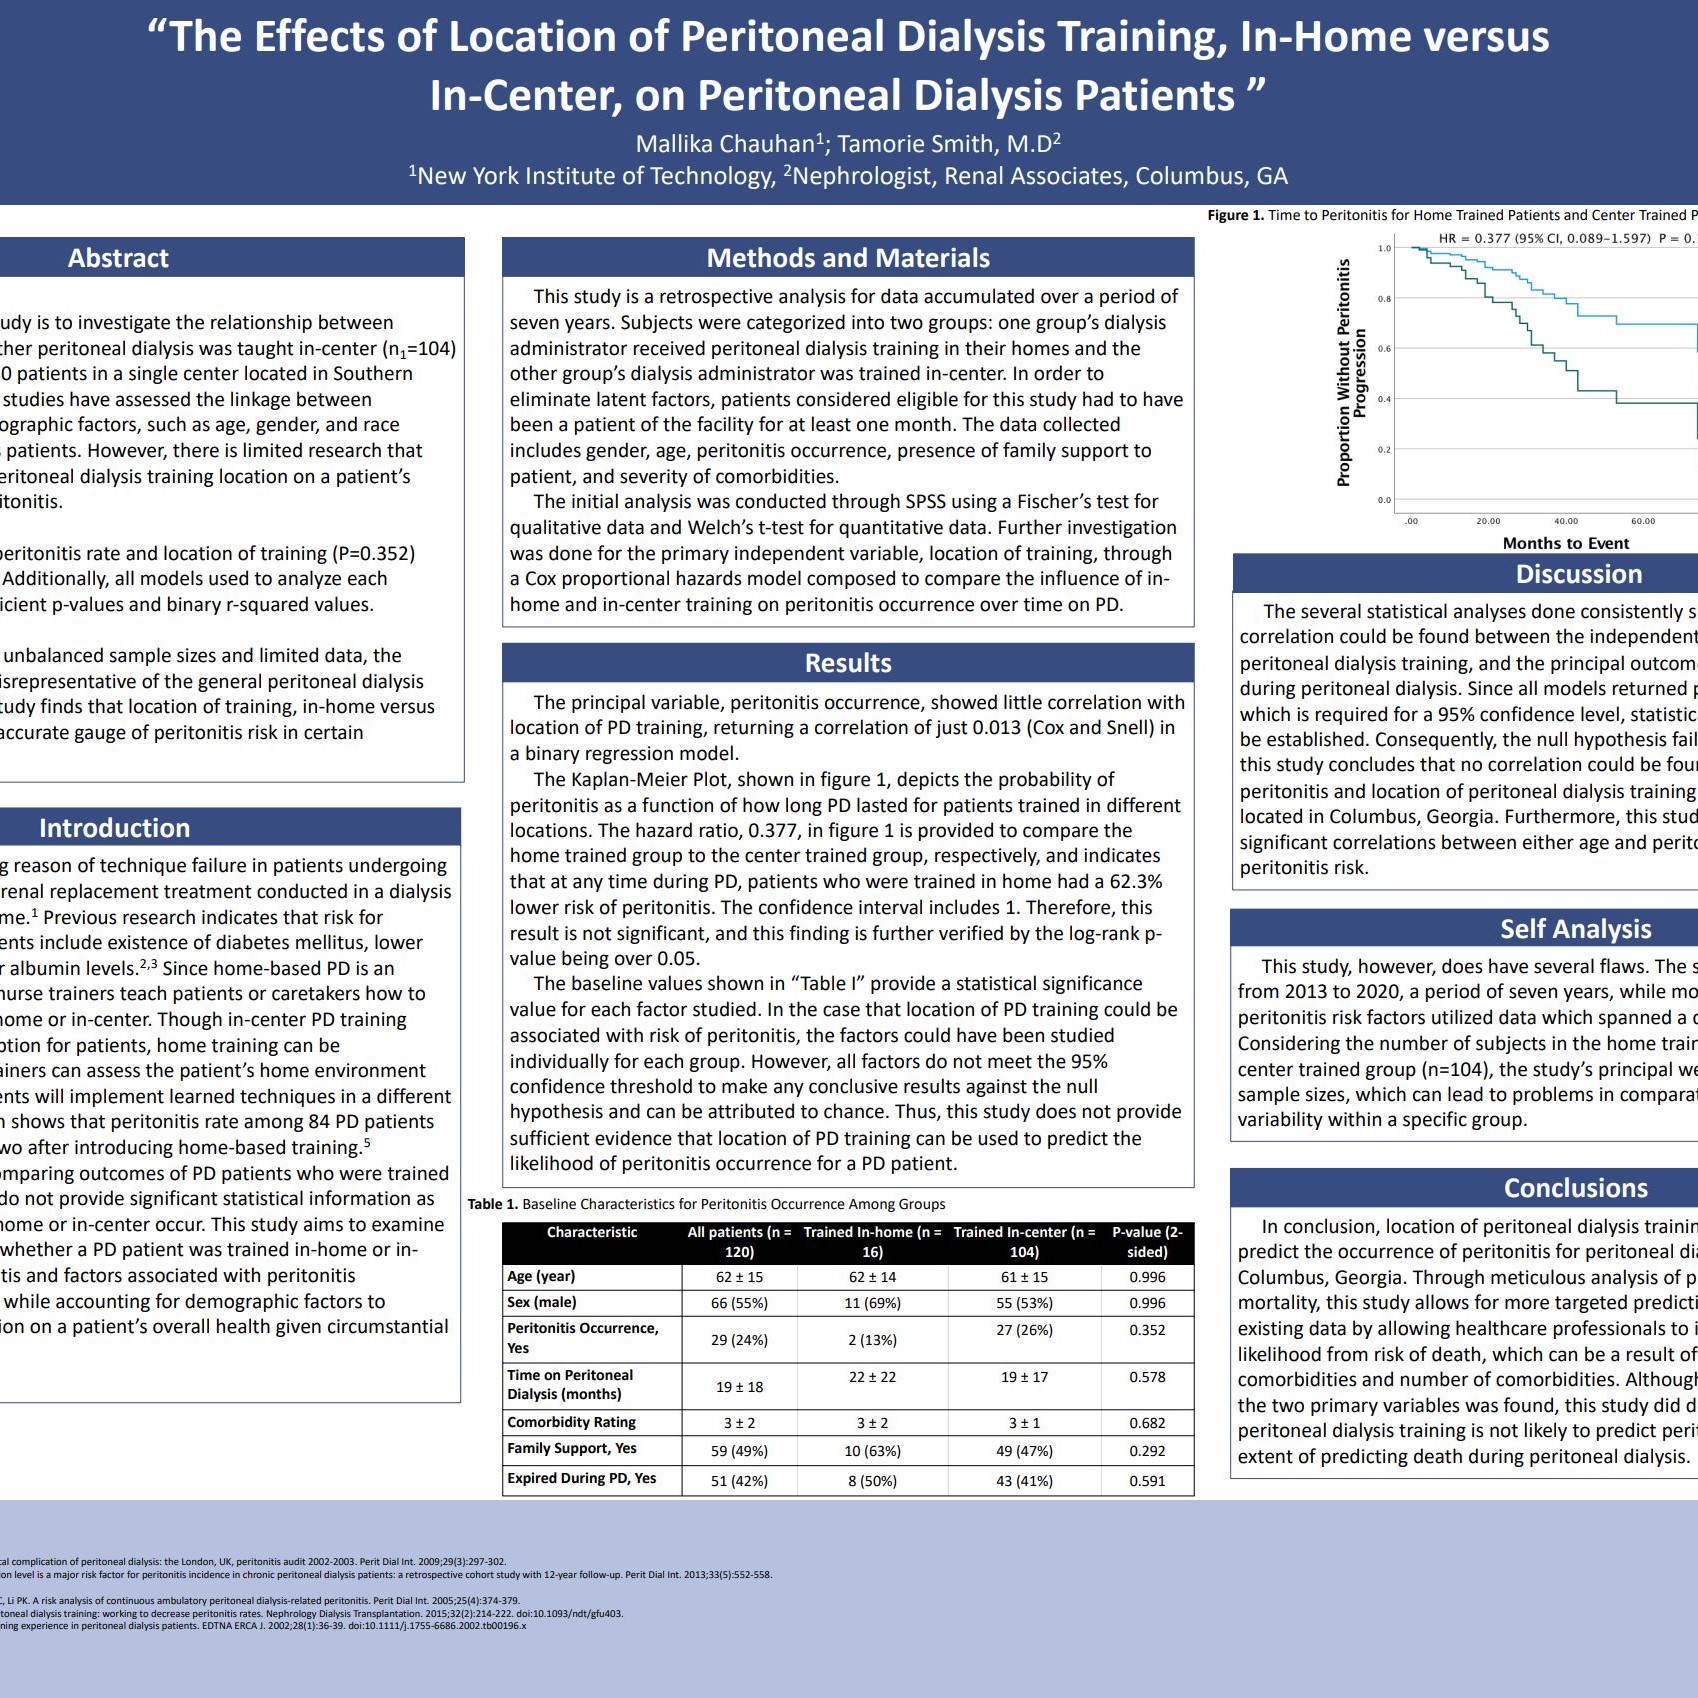 The Effects of Location of Peritoneal Dialysis Training, In-Home versus
In-Center, on Peritoneal Dialysis Patients